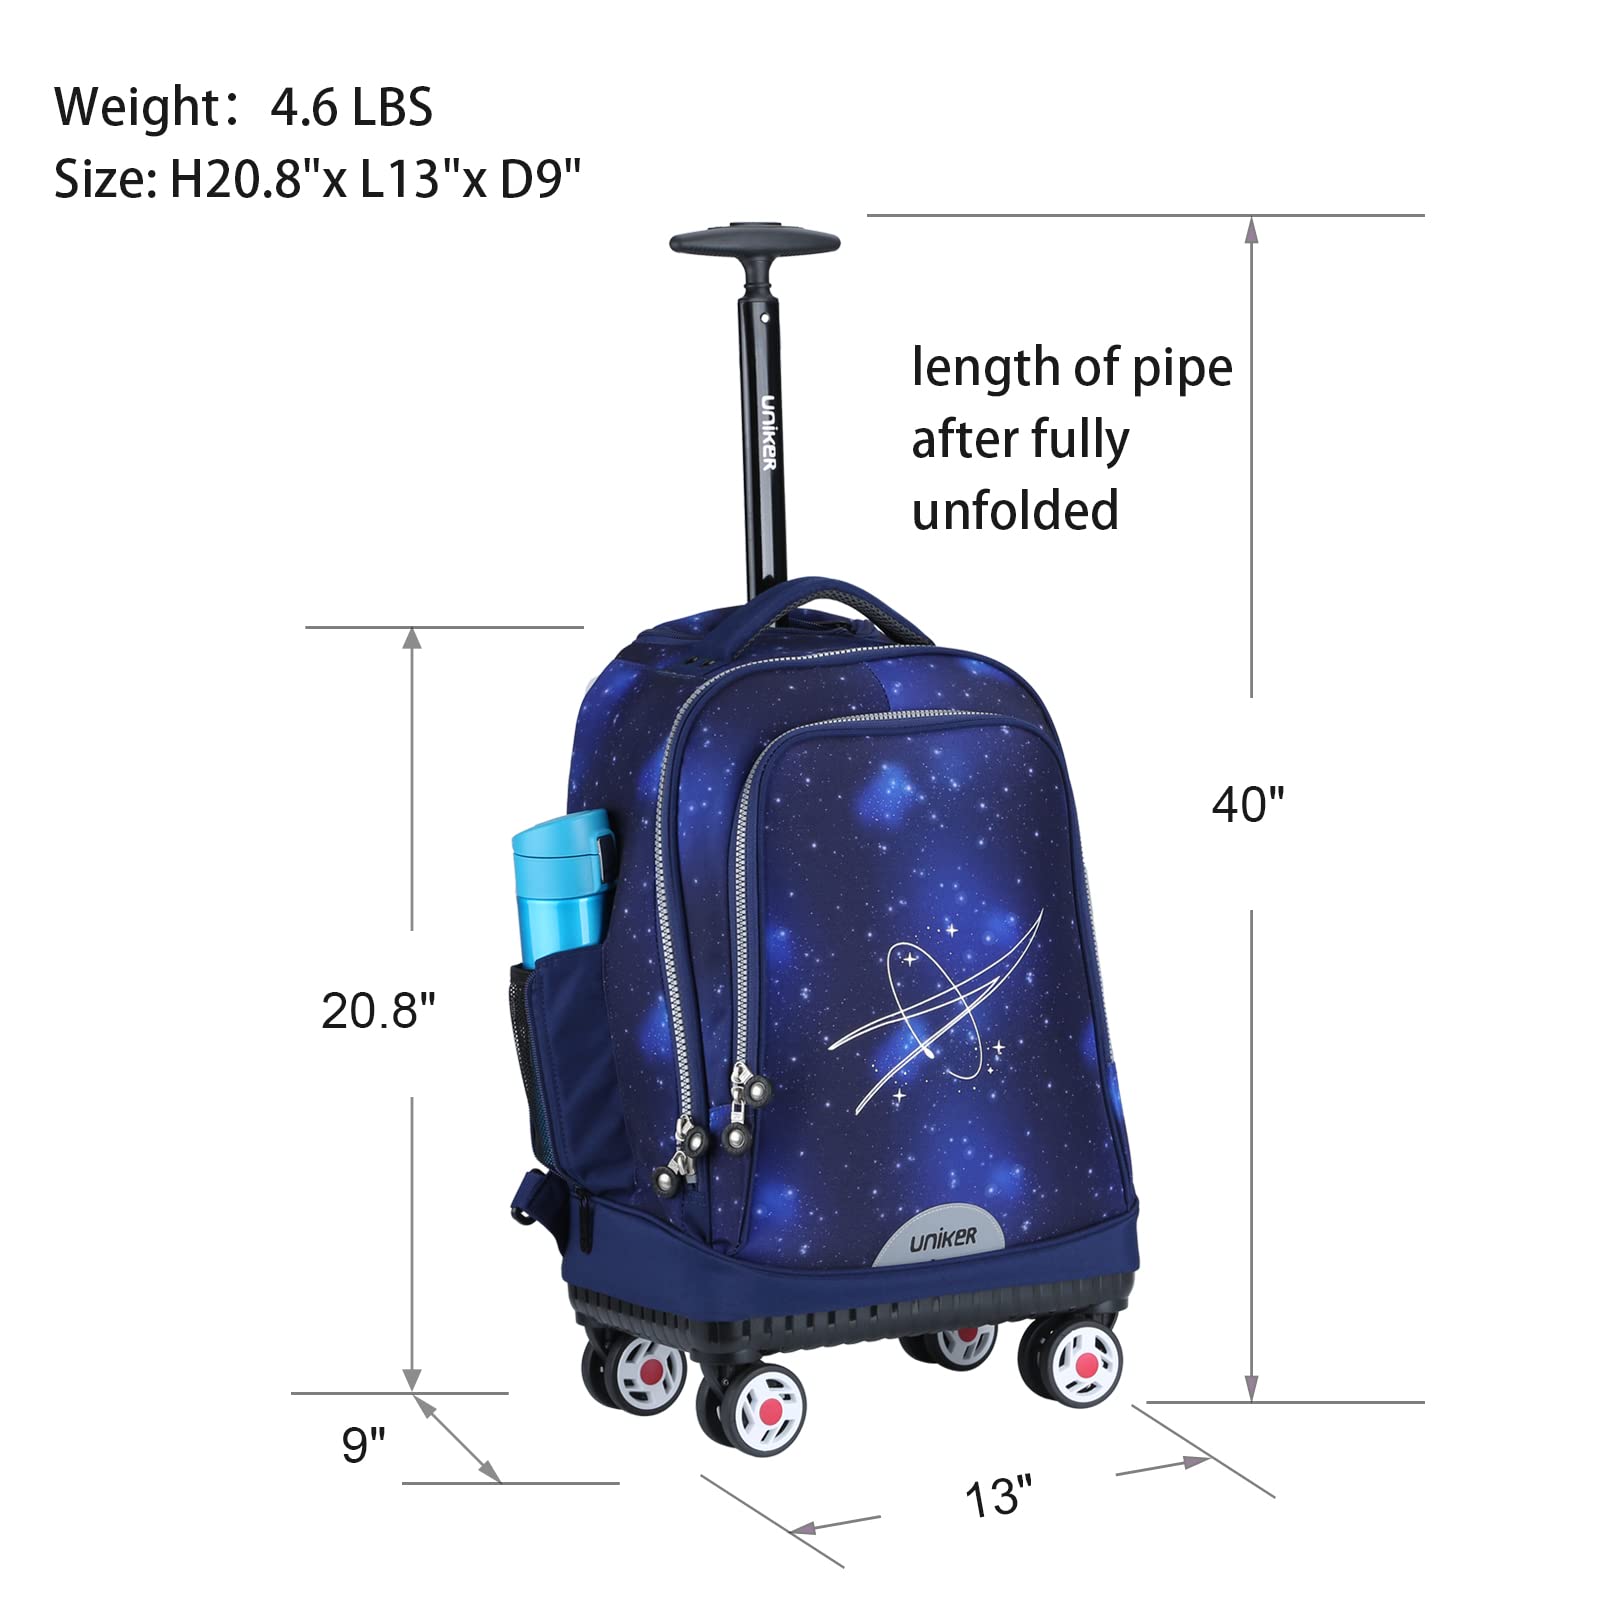 UNIKER Rolling Backpack,Softside Luggage with Spinner Wheels for Travel, Roller Bag with Wheels,Wheeled Backpack with Laptop Compartment Fit 15.6 Inch Laptop